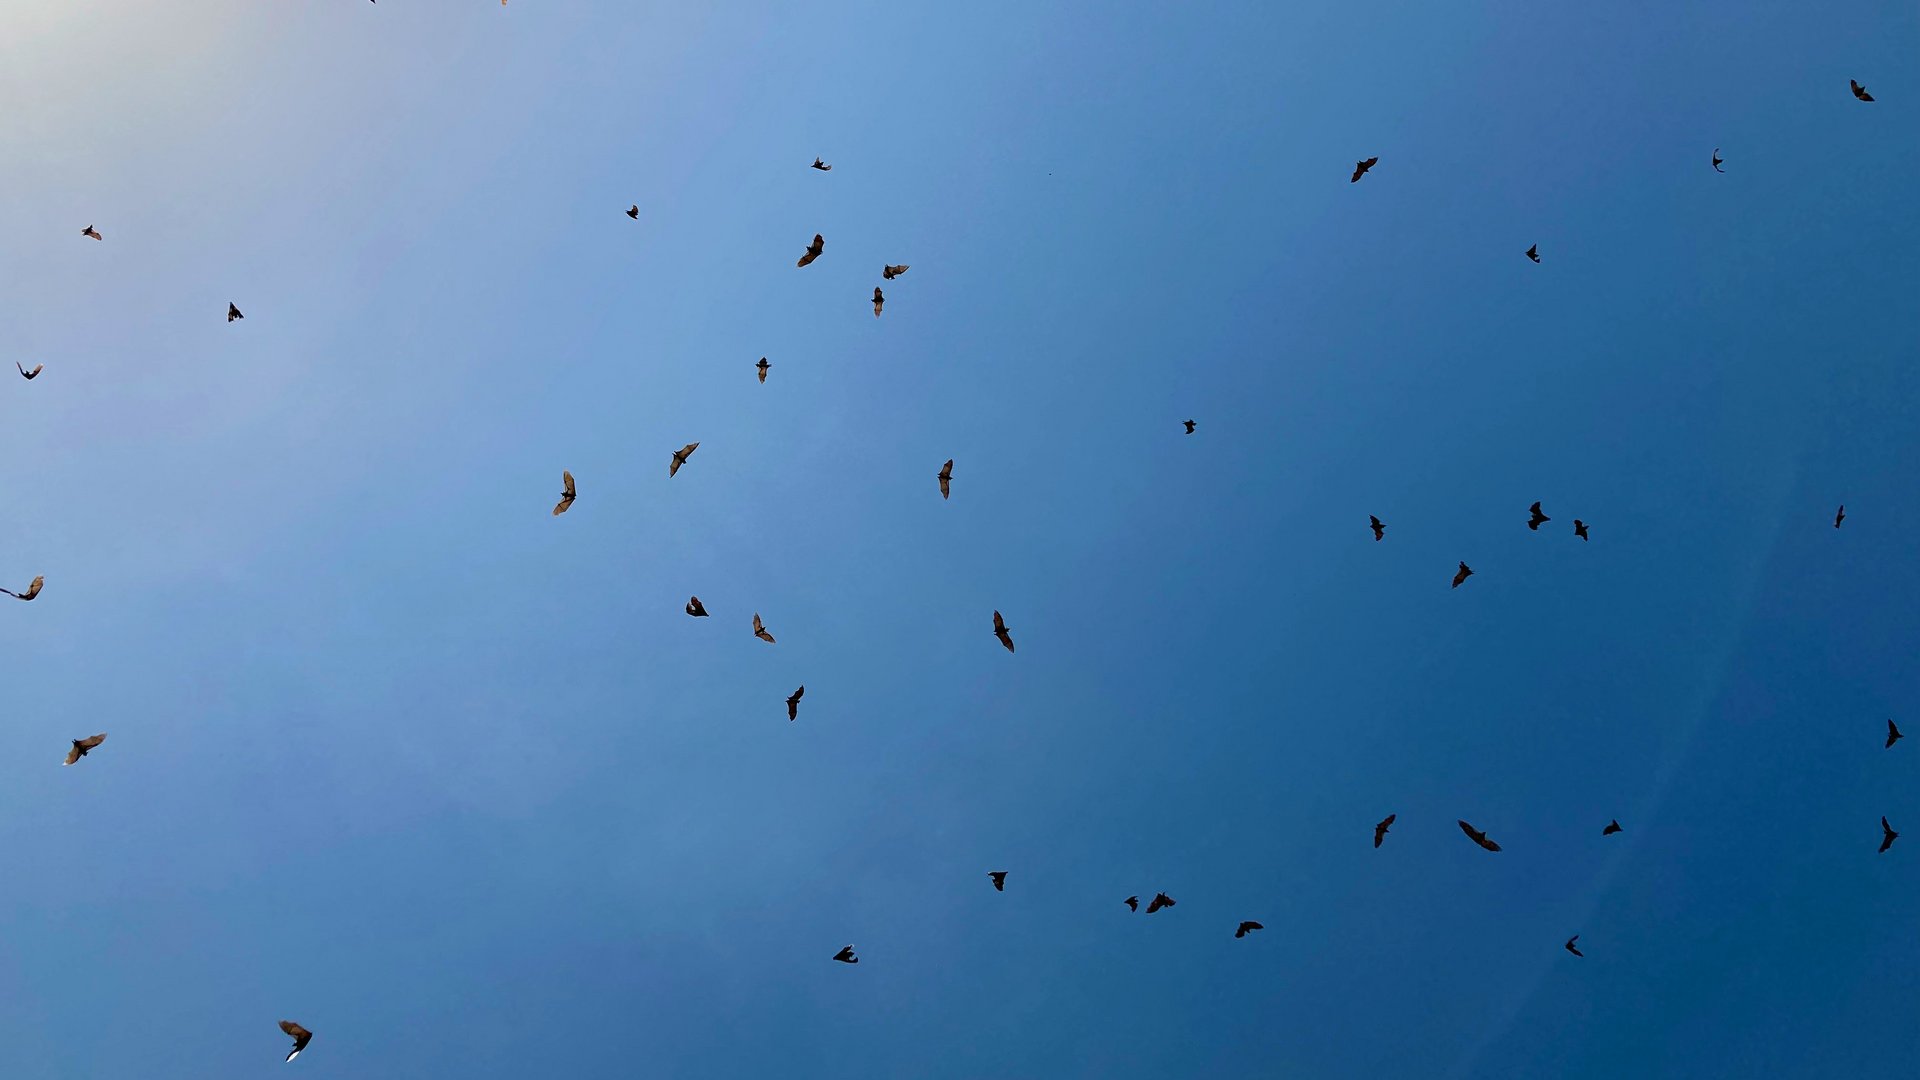 Bats in the sky of the Democratic Republic of the Congo